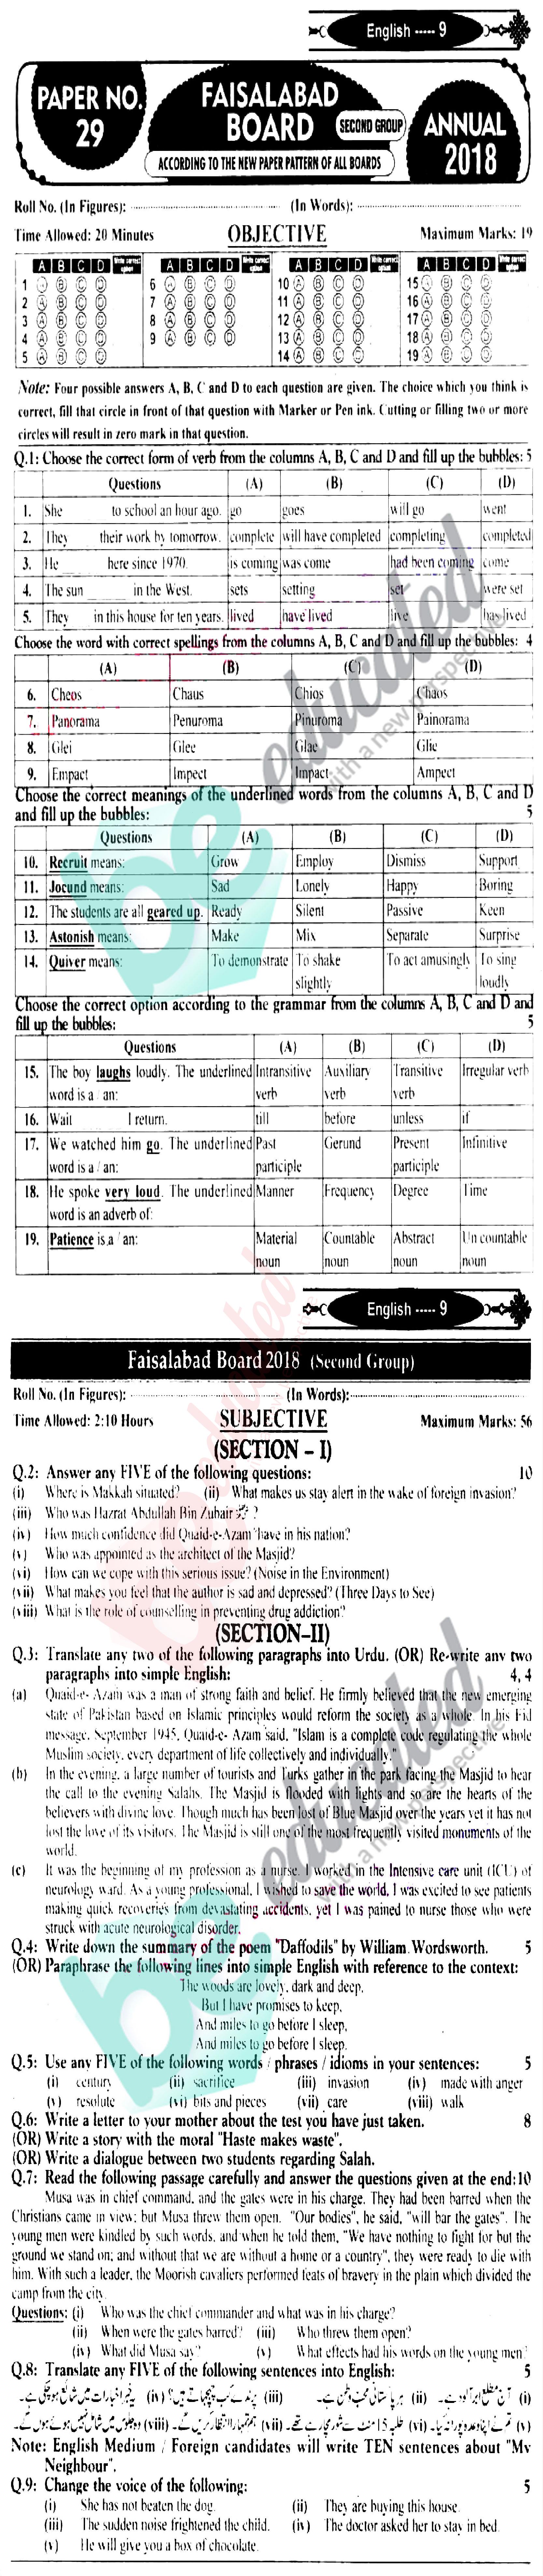 English 9th class Past Paper Group 2 BISE Faisalabad 2018